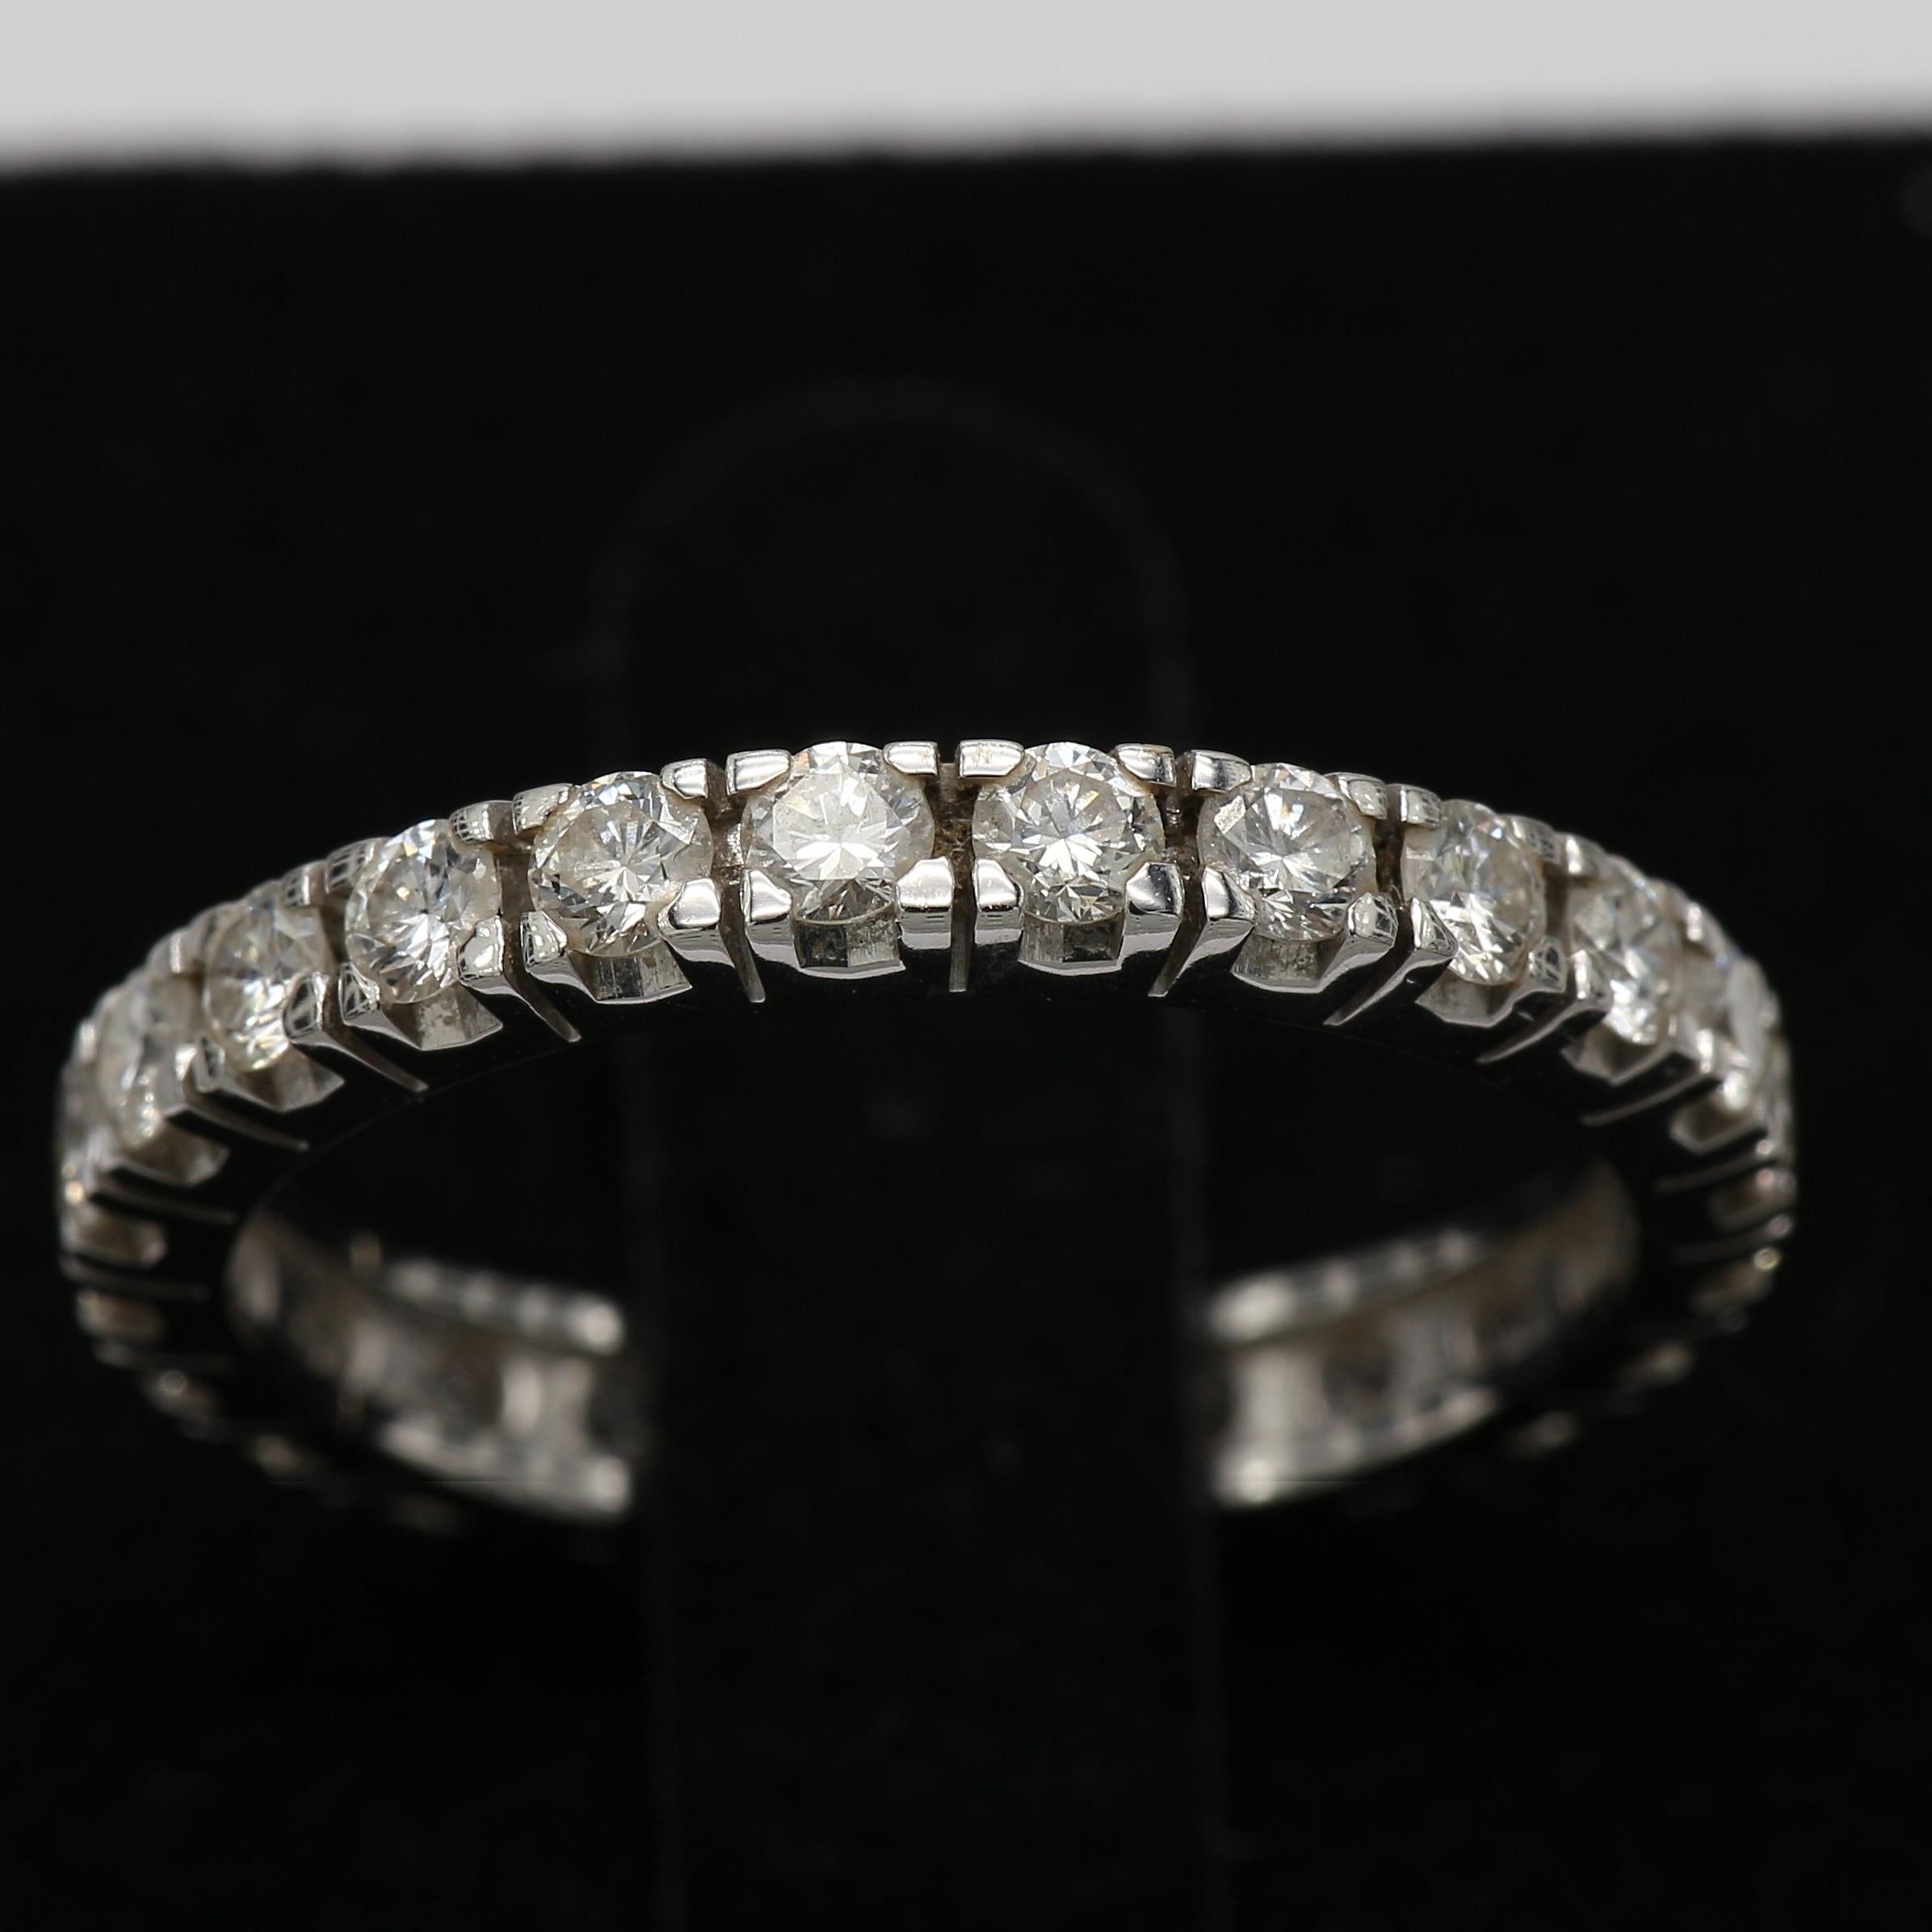 Women's Eternity Band Ring with Round Diamonds 1.90 Carat in 18 KWhite Gold For Sale